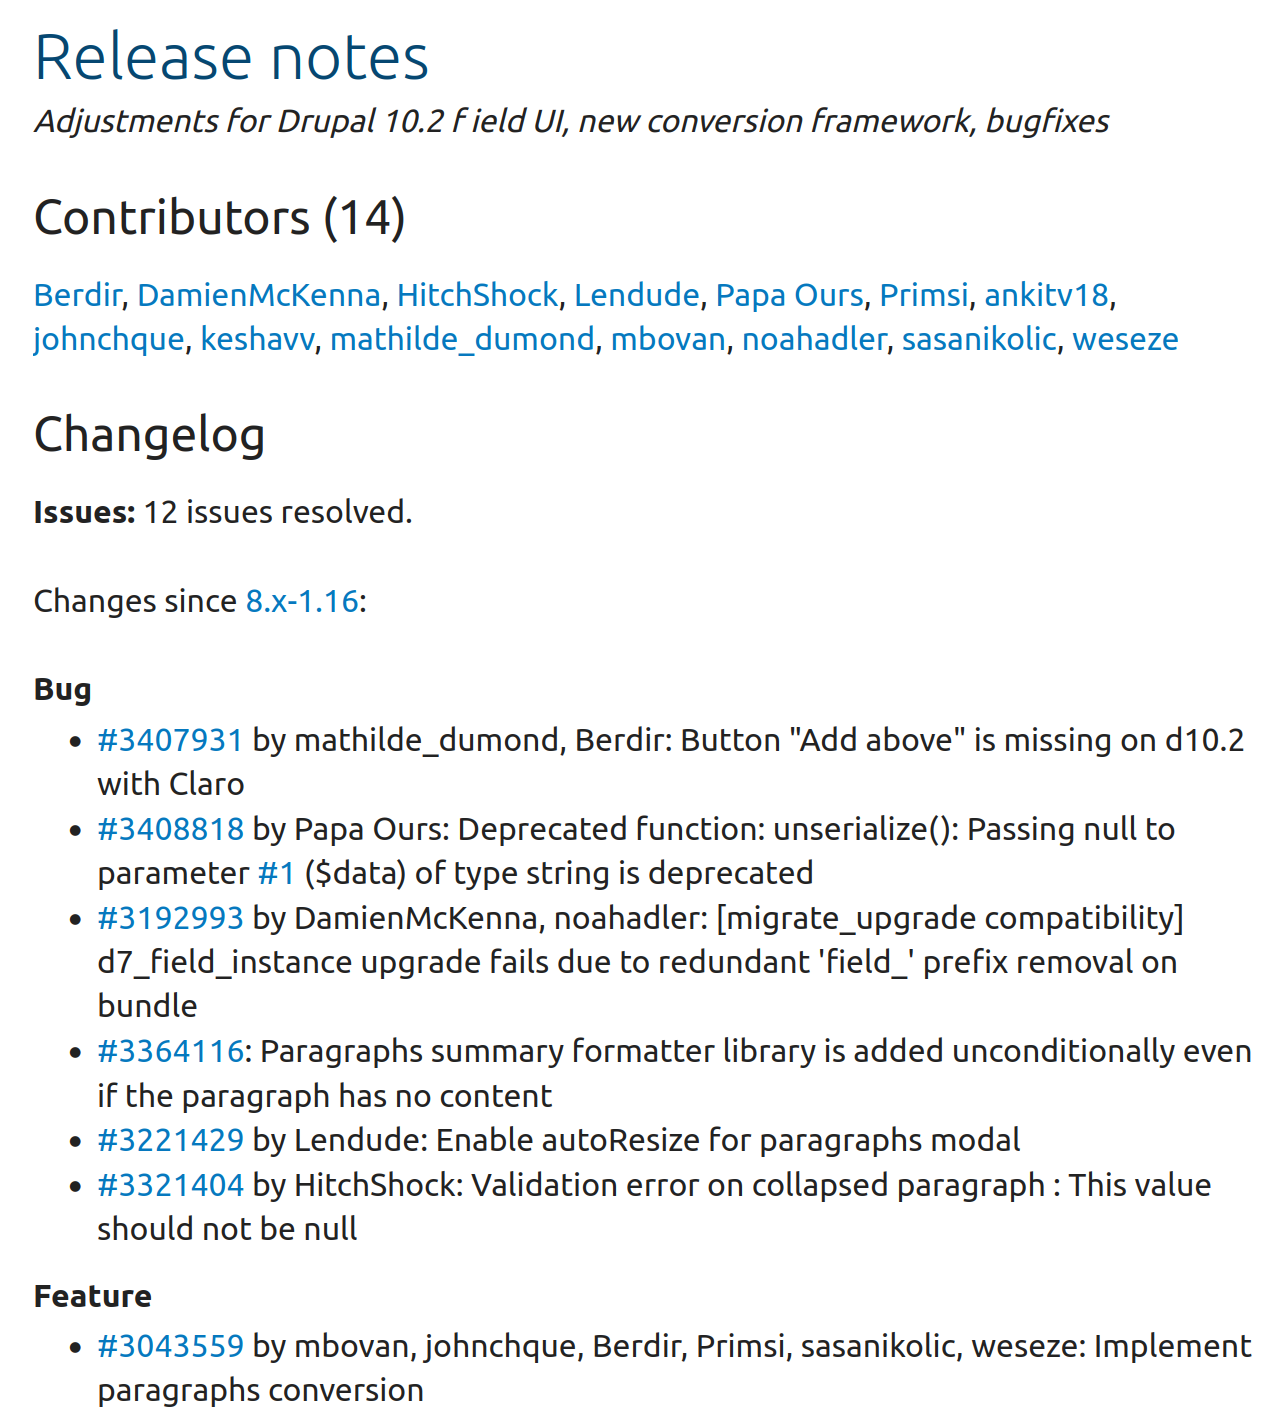 Screenshot of Paragraph release notes